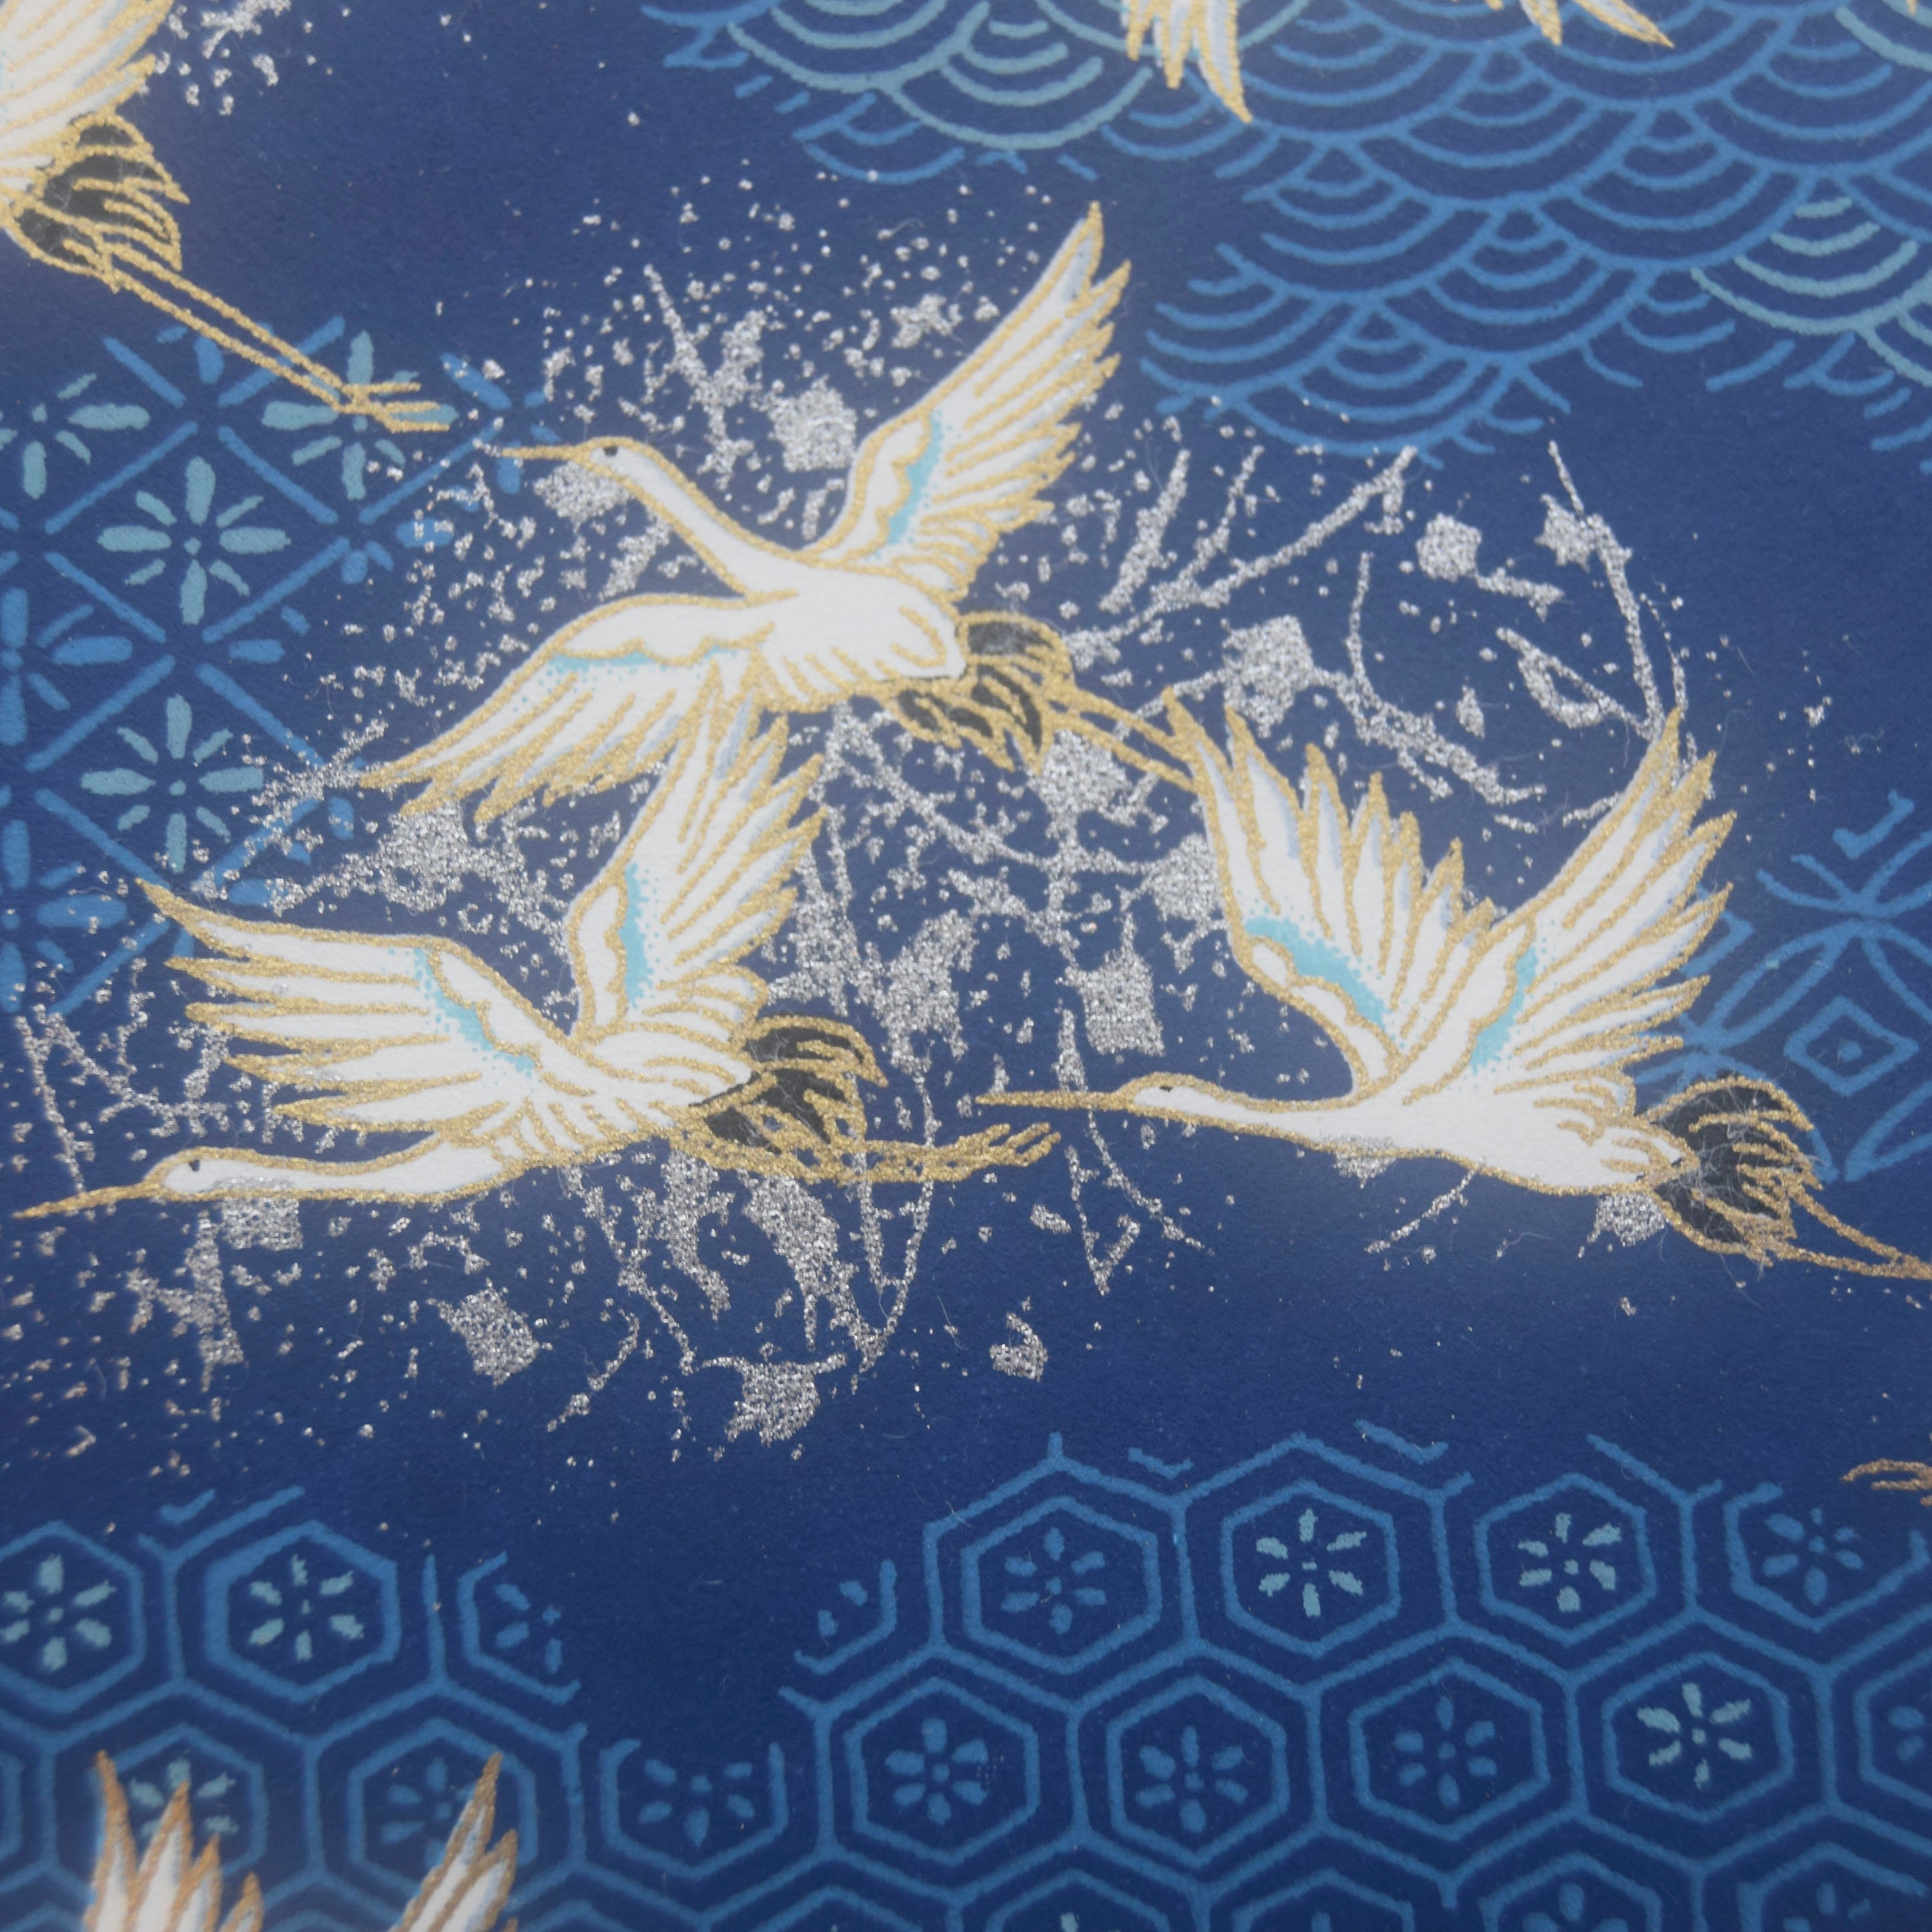 Japanese Chiyogami Paper White and Gold Cranes on Blue | Etsy